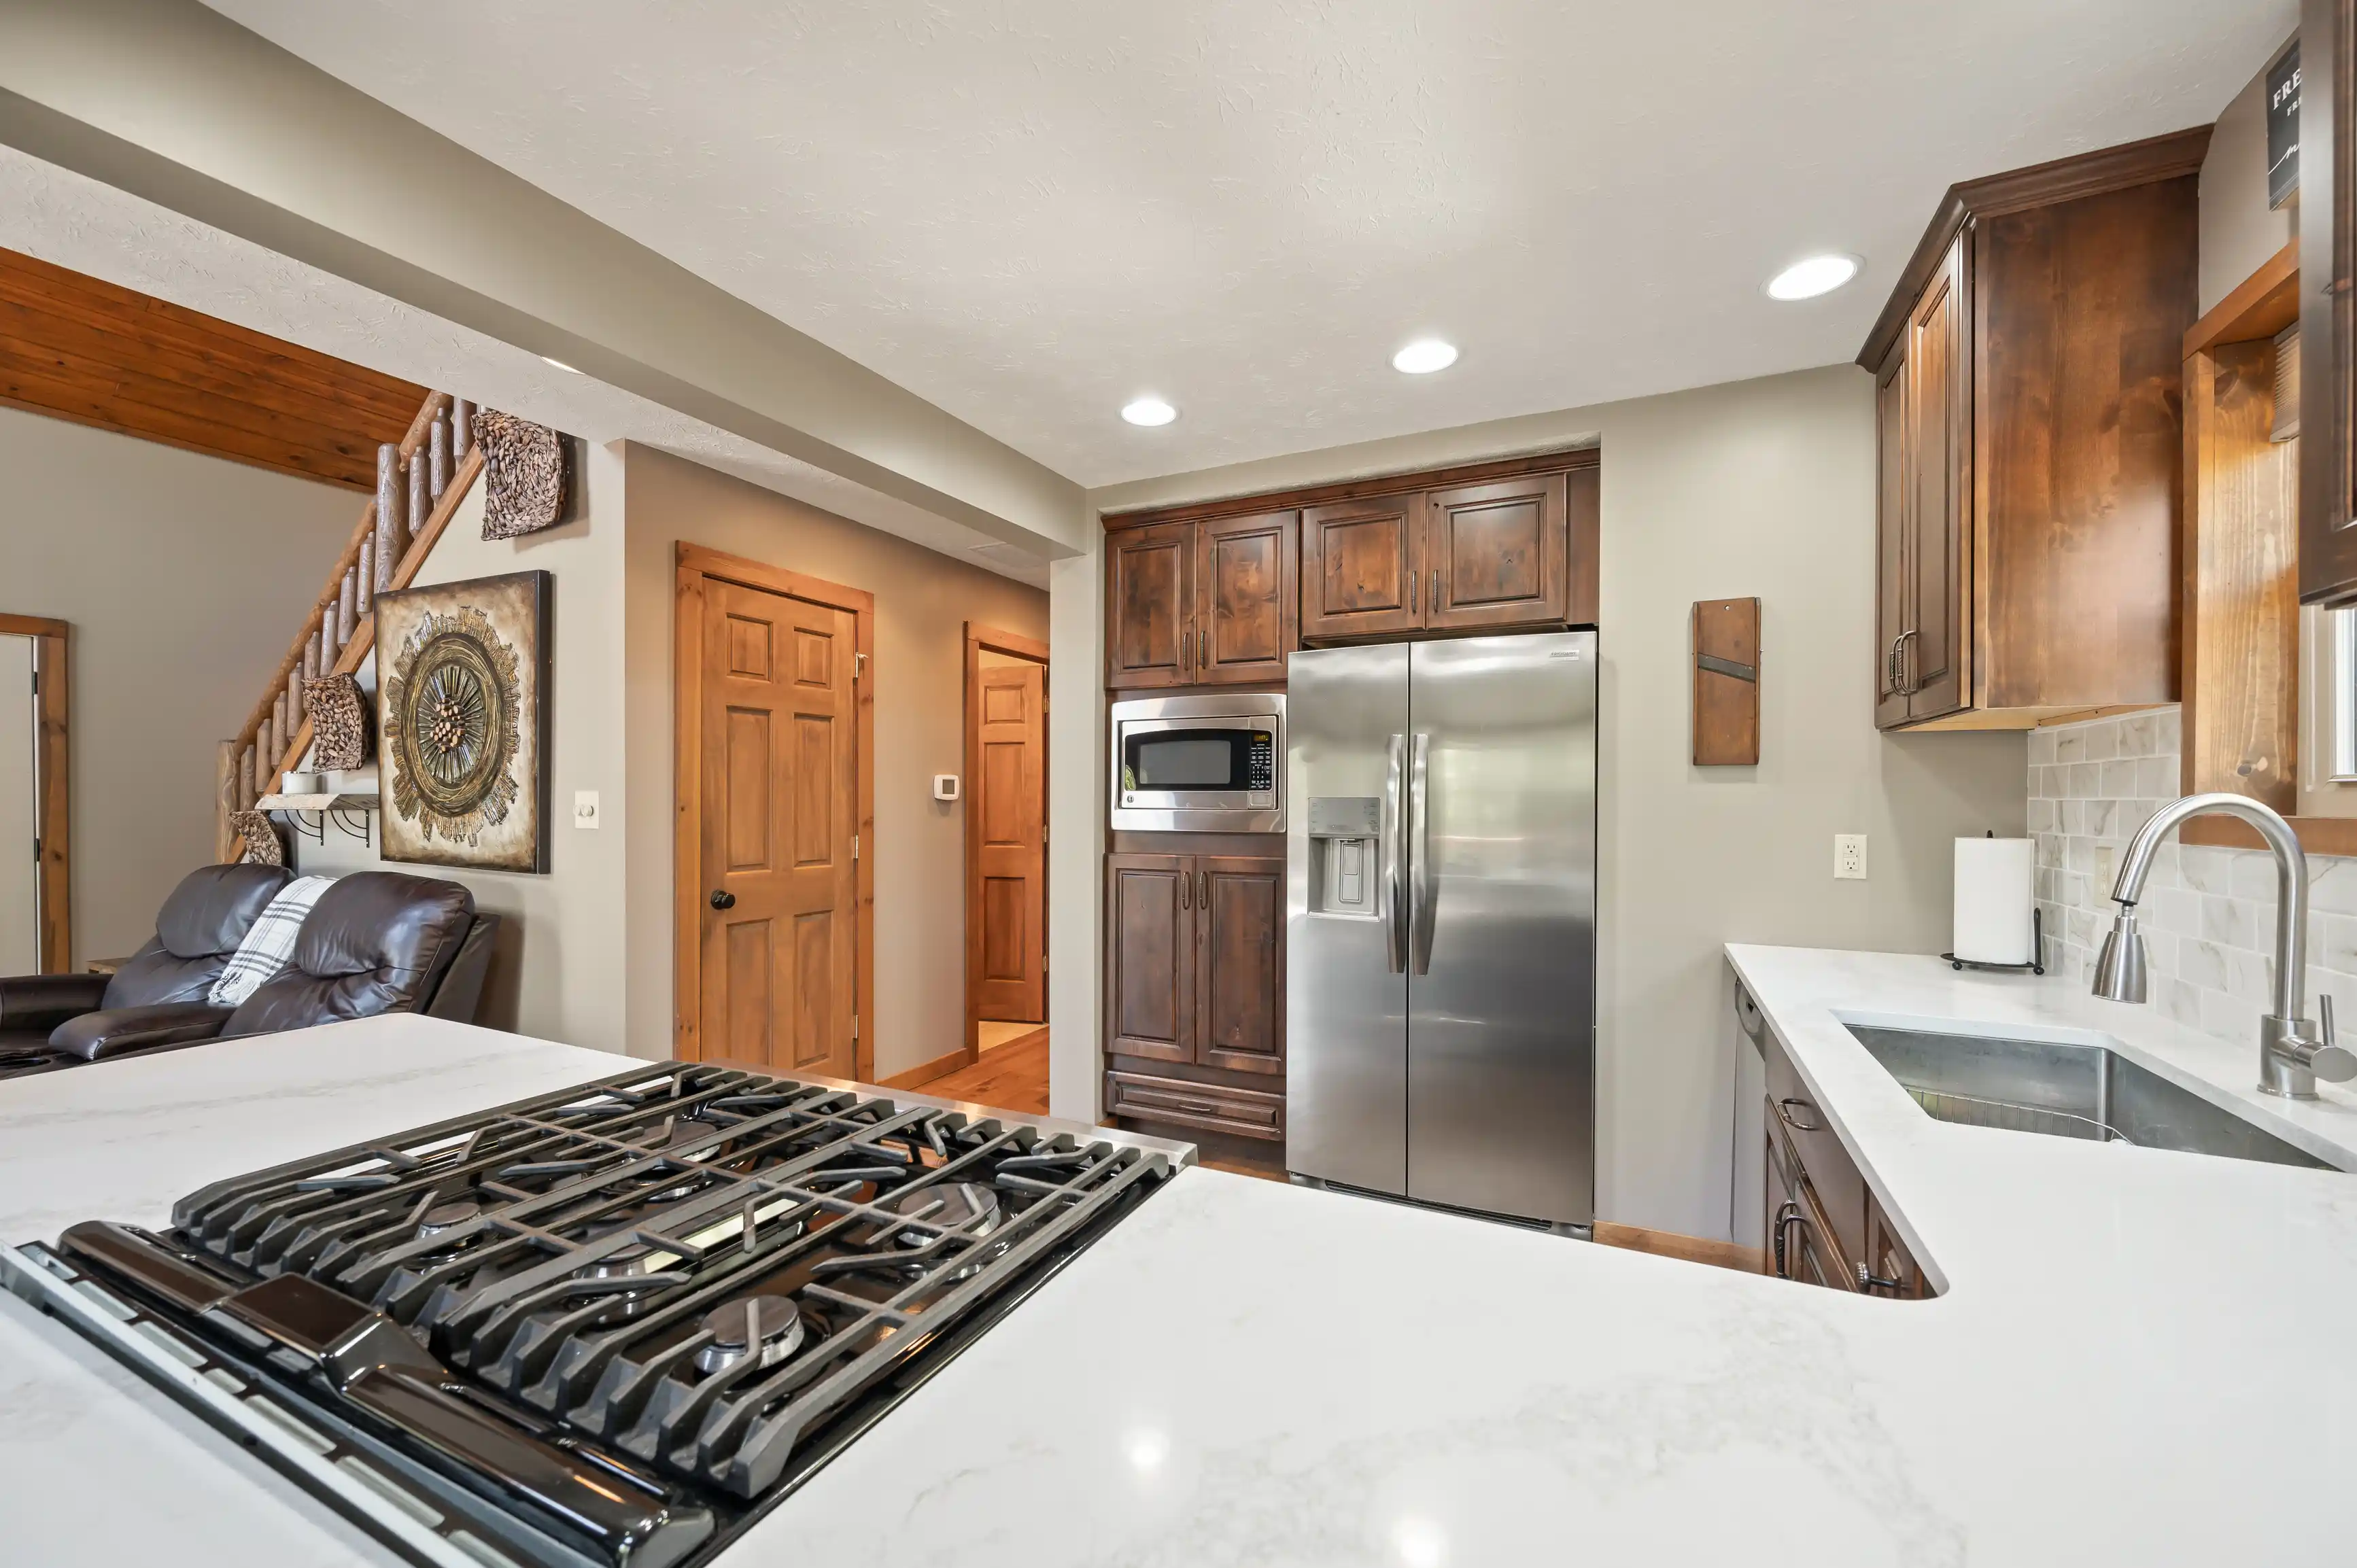 Modern kitchen interior with stainless steel appliances, wooden cabinets, and a white marble countertop.